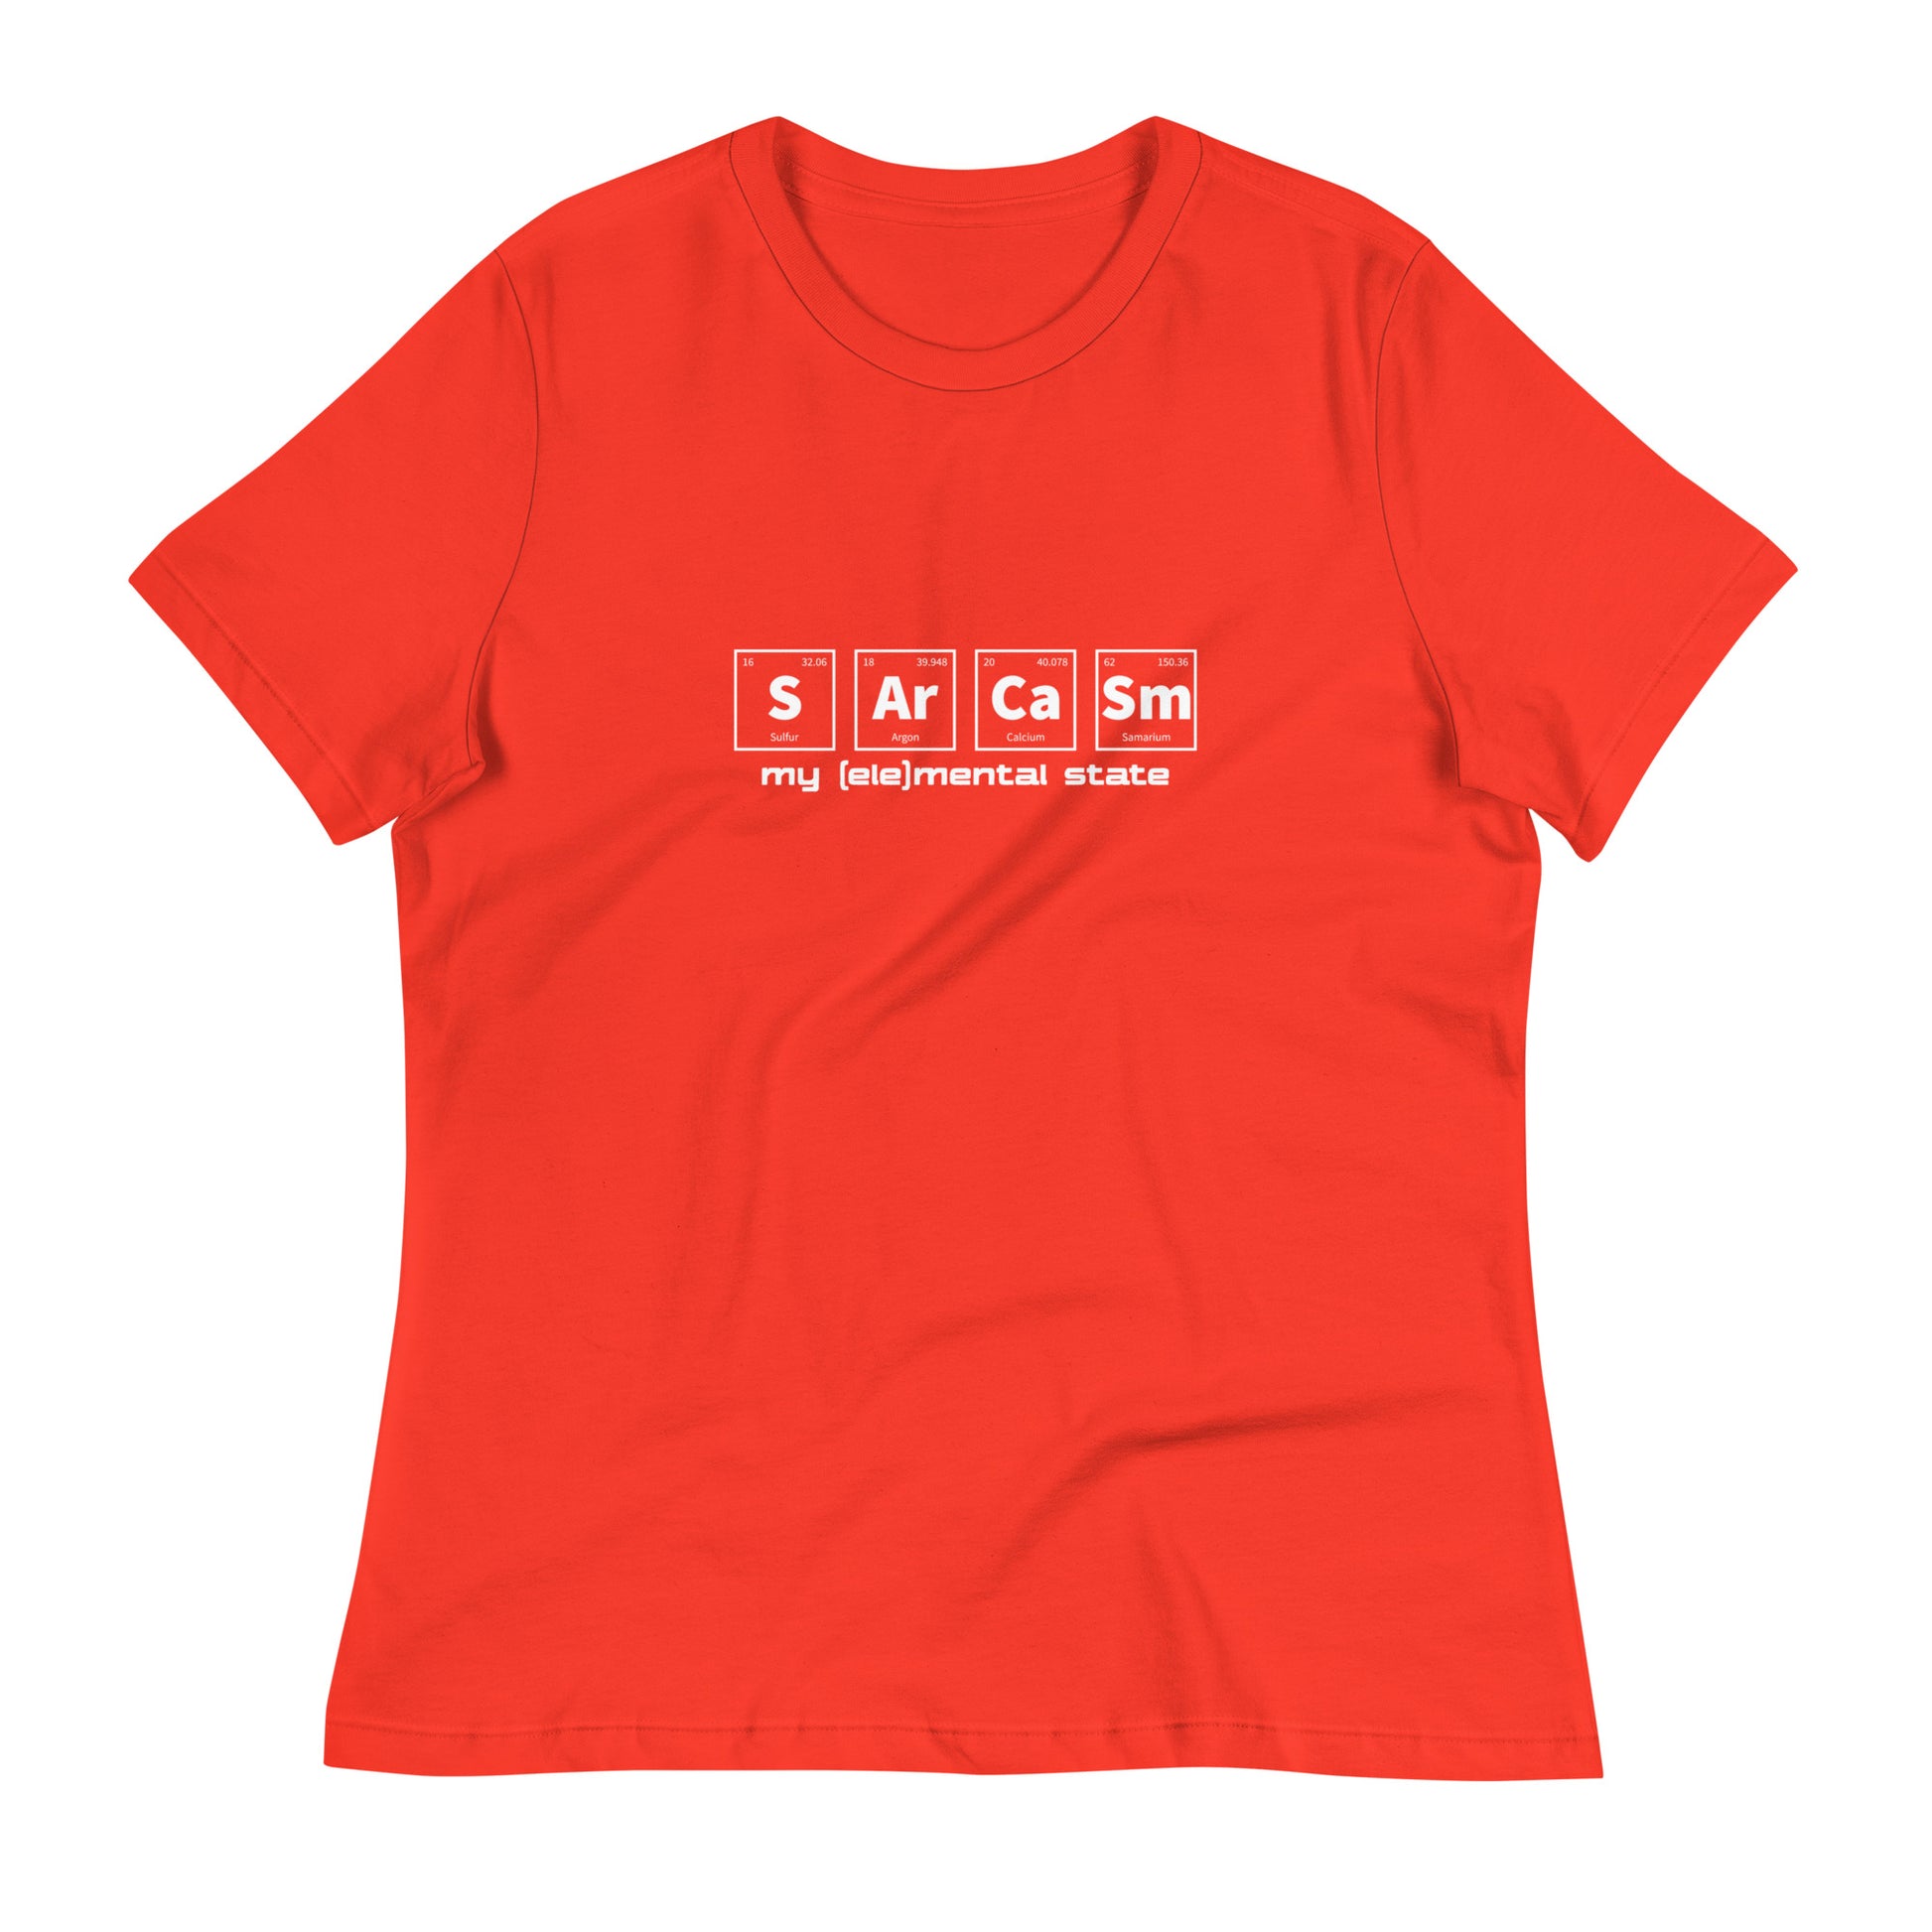 Poppy (bright red) women's relaxed fit t-shirt with graphic of periodic table of elements symbols for Sulfur (S), Argon (Ar), Calcium (Ca), and Samarium (Sm) and text "my (ele)mental state"